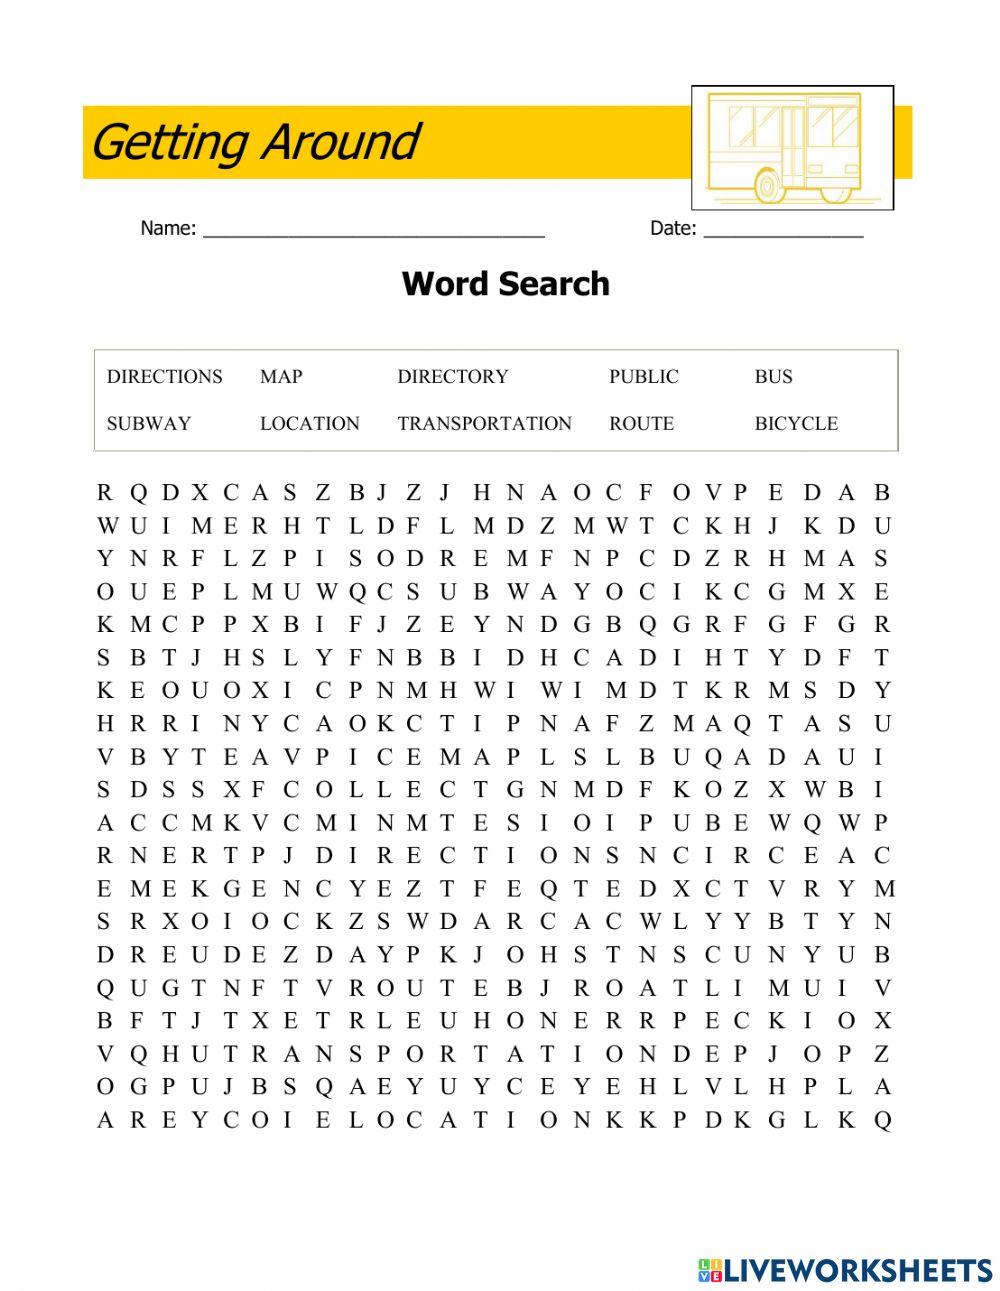 Getting Around Wordsearch